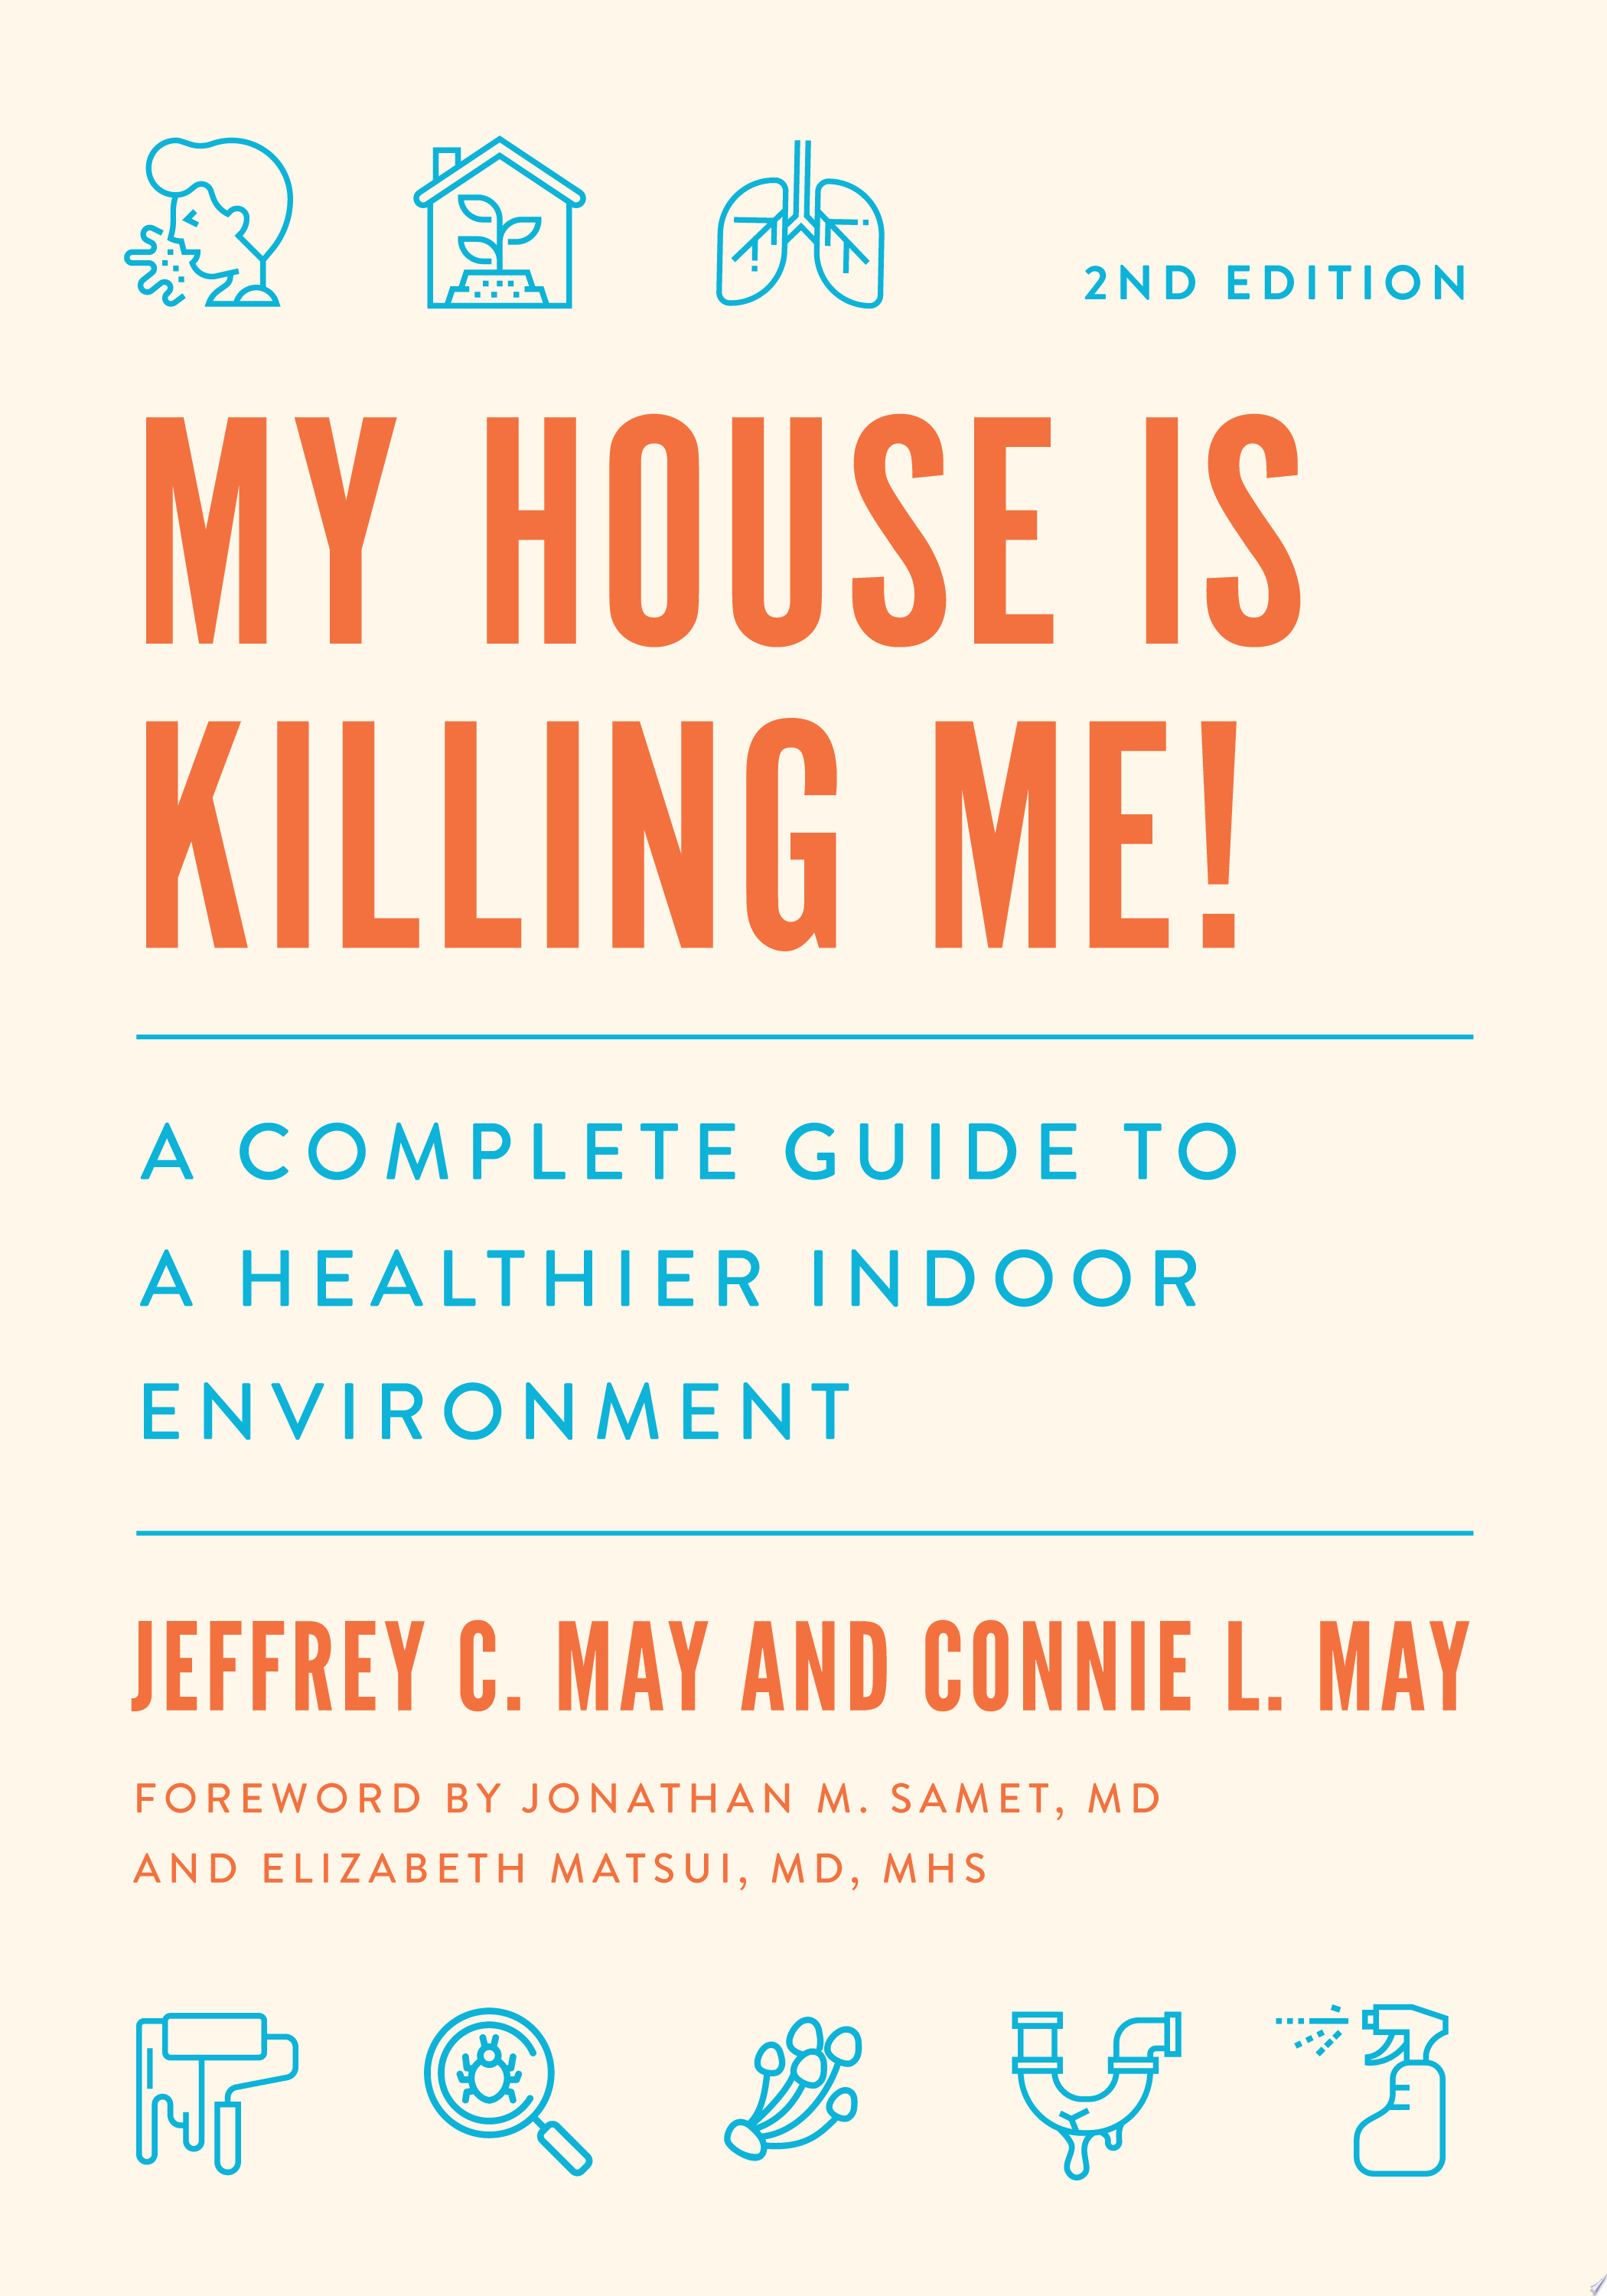 Image for "My House Is Killing Me!"